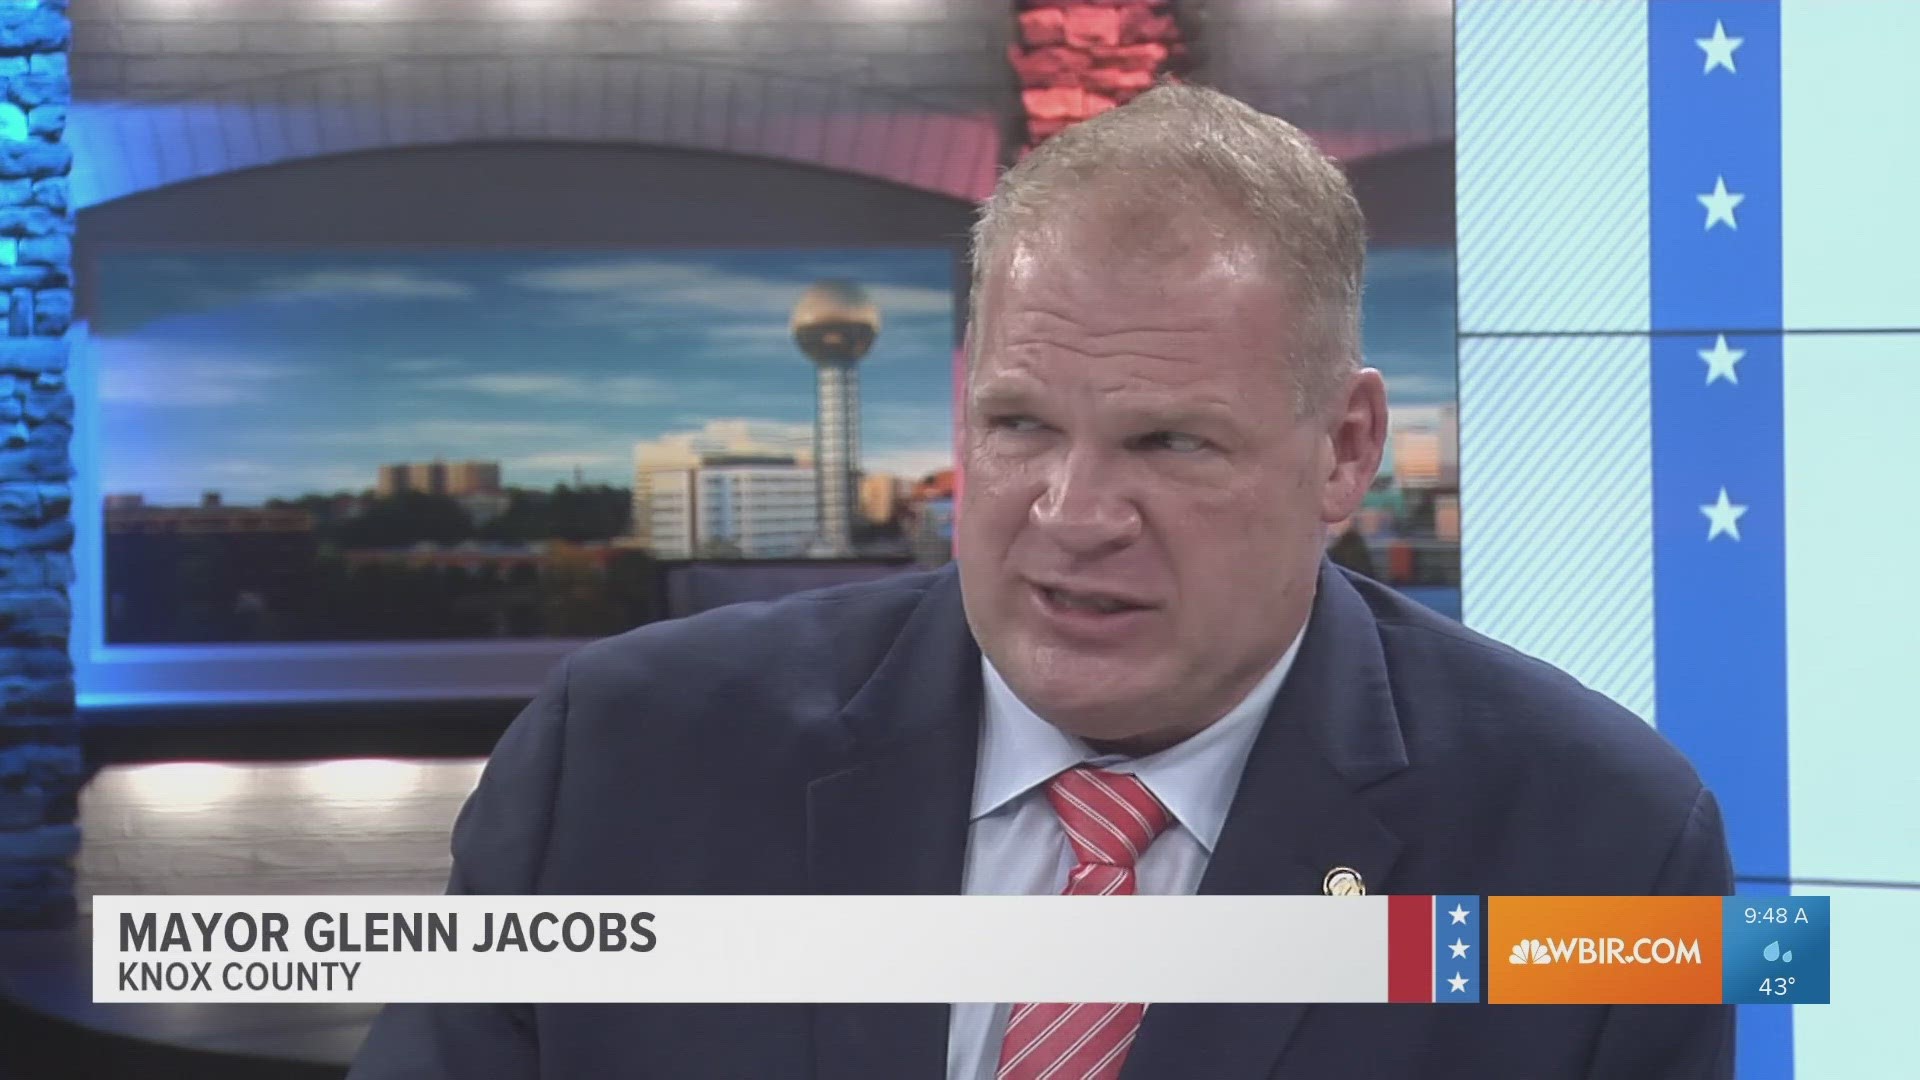 Knox County Mayor Glenn Jacobs talks about traffic, growth and other county matters.